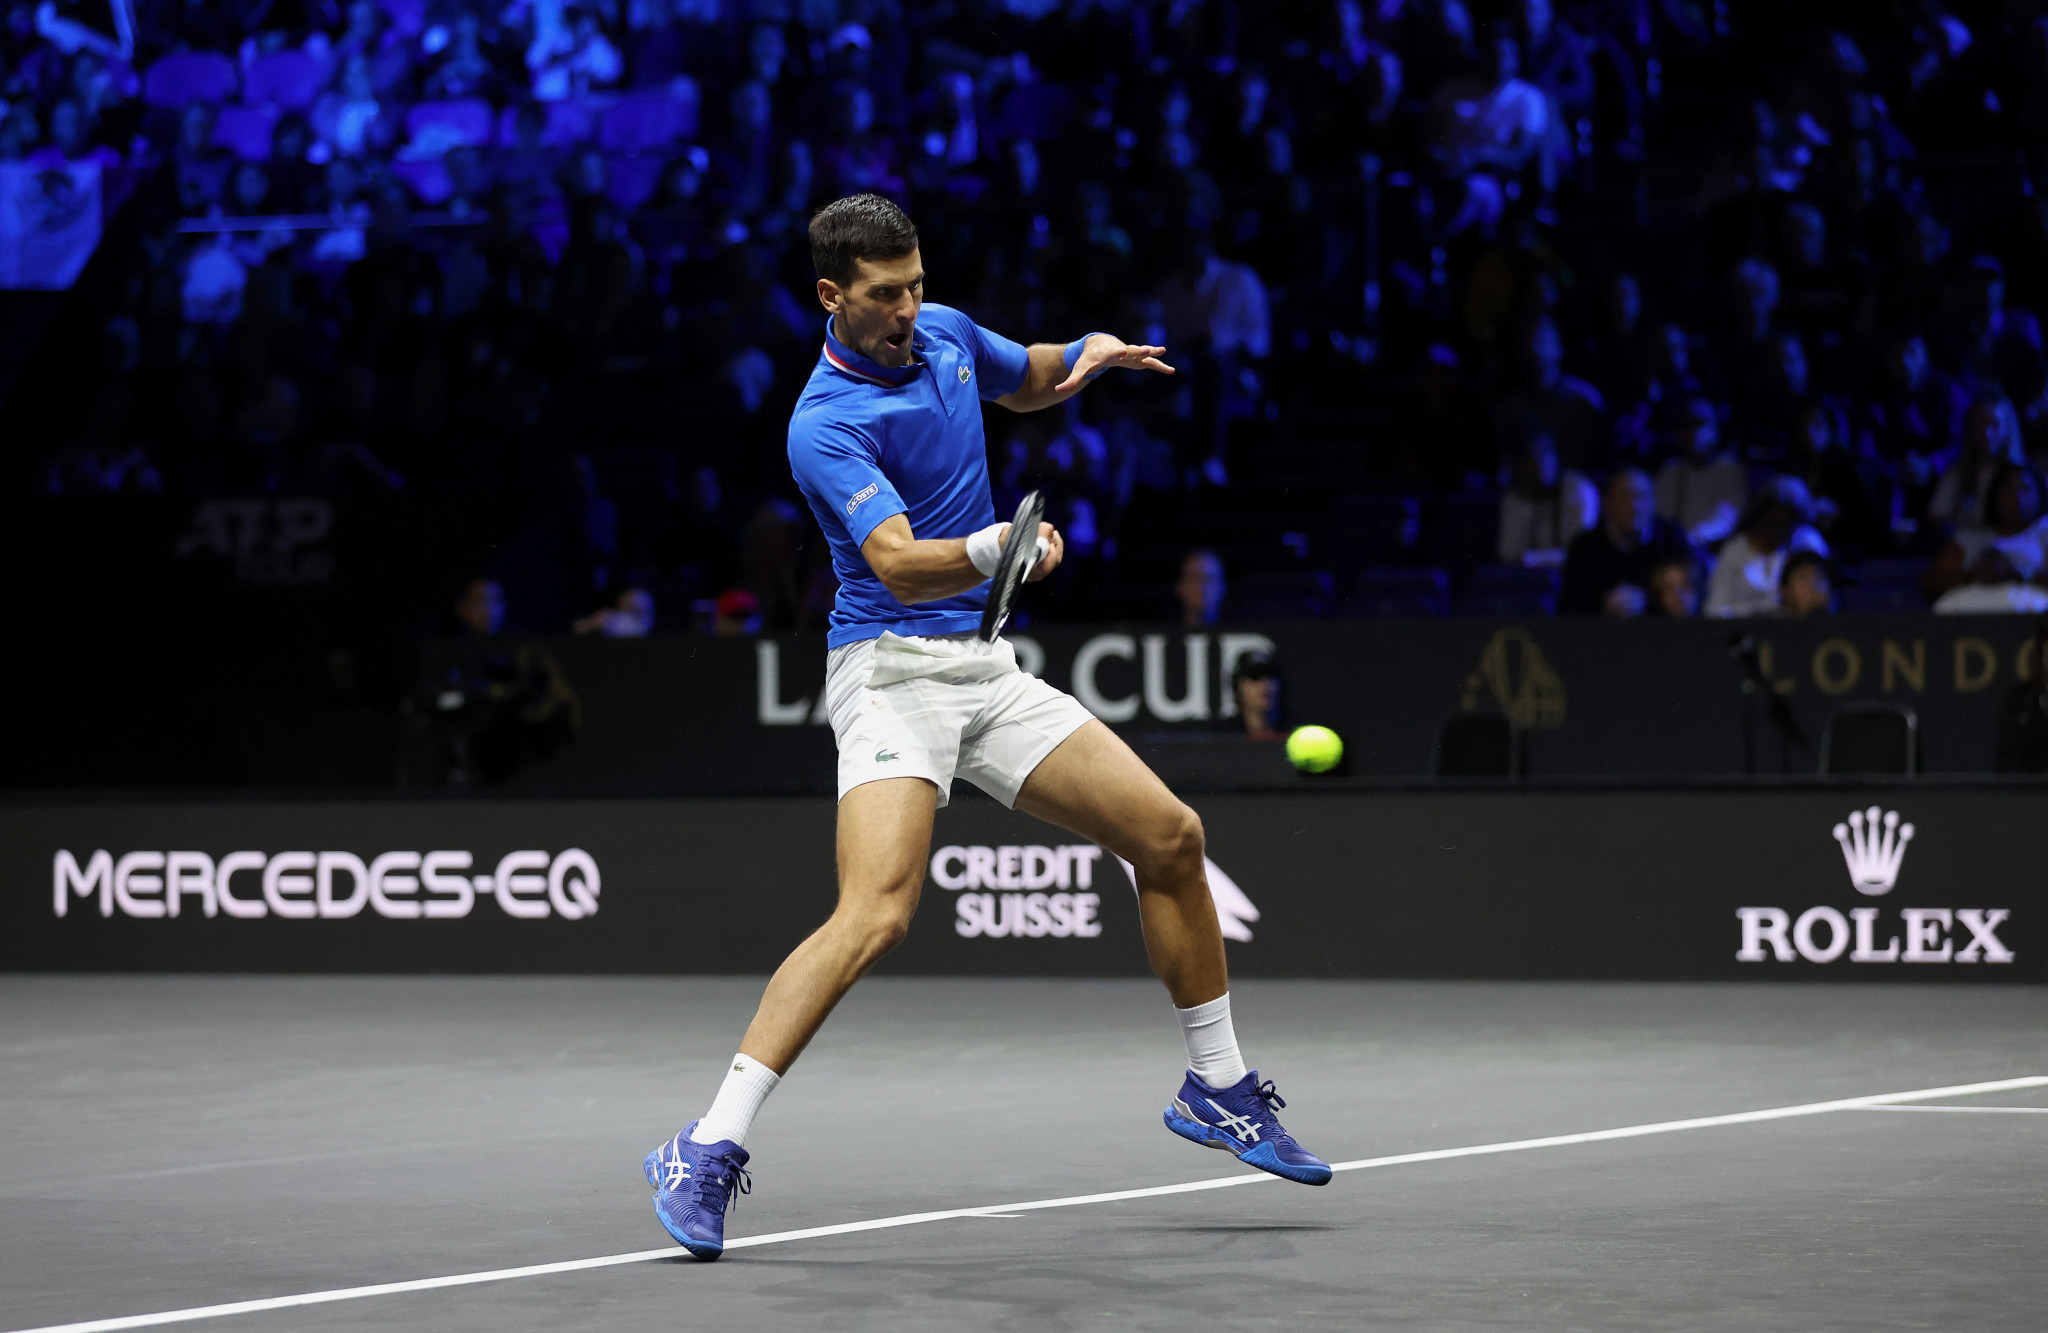 Double success for Djokovic puts Europe into lead on day two of Laver Cup